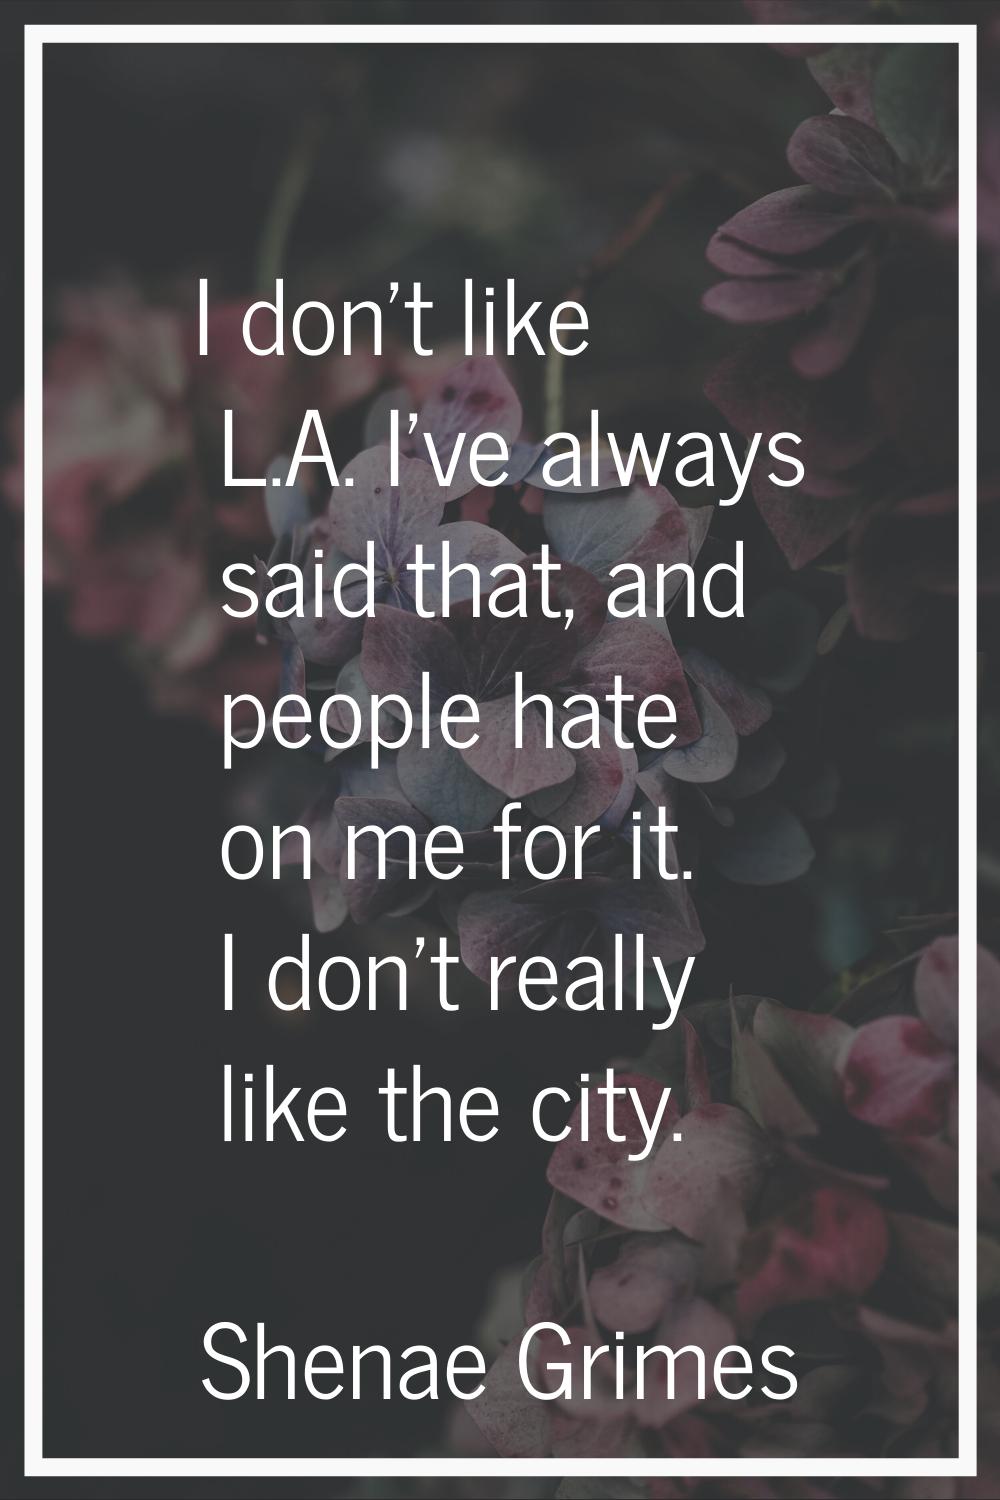 I don't like L.A. I've always said that, and people hate on me for it. I don't really like the city